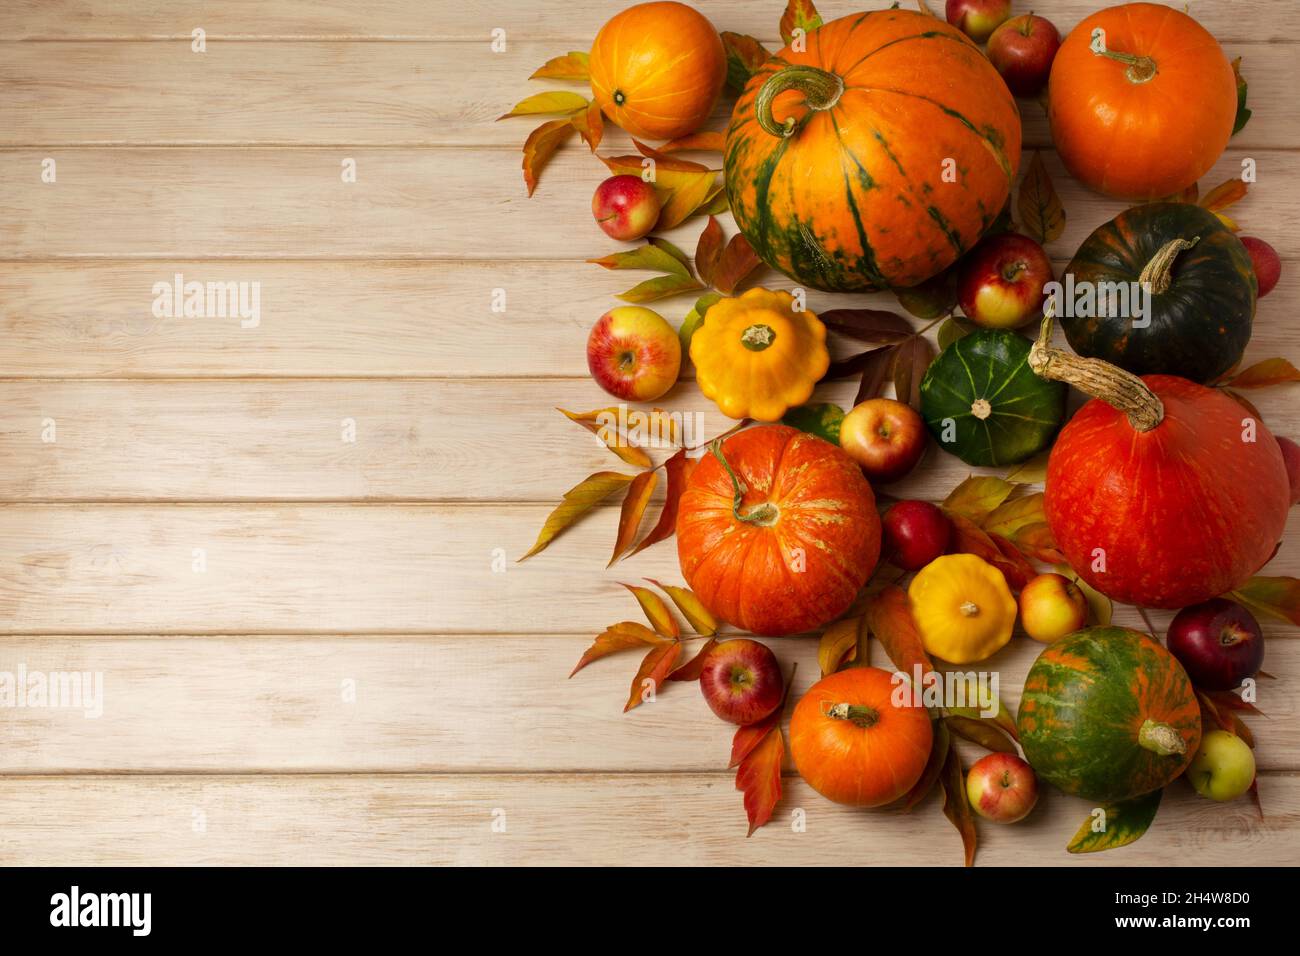 Thanksgiving arrangement with red, green, orange, striped pumpkins, fall leaves, yellow squashes on the white wooden table, copy space Stock Photo